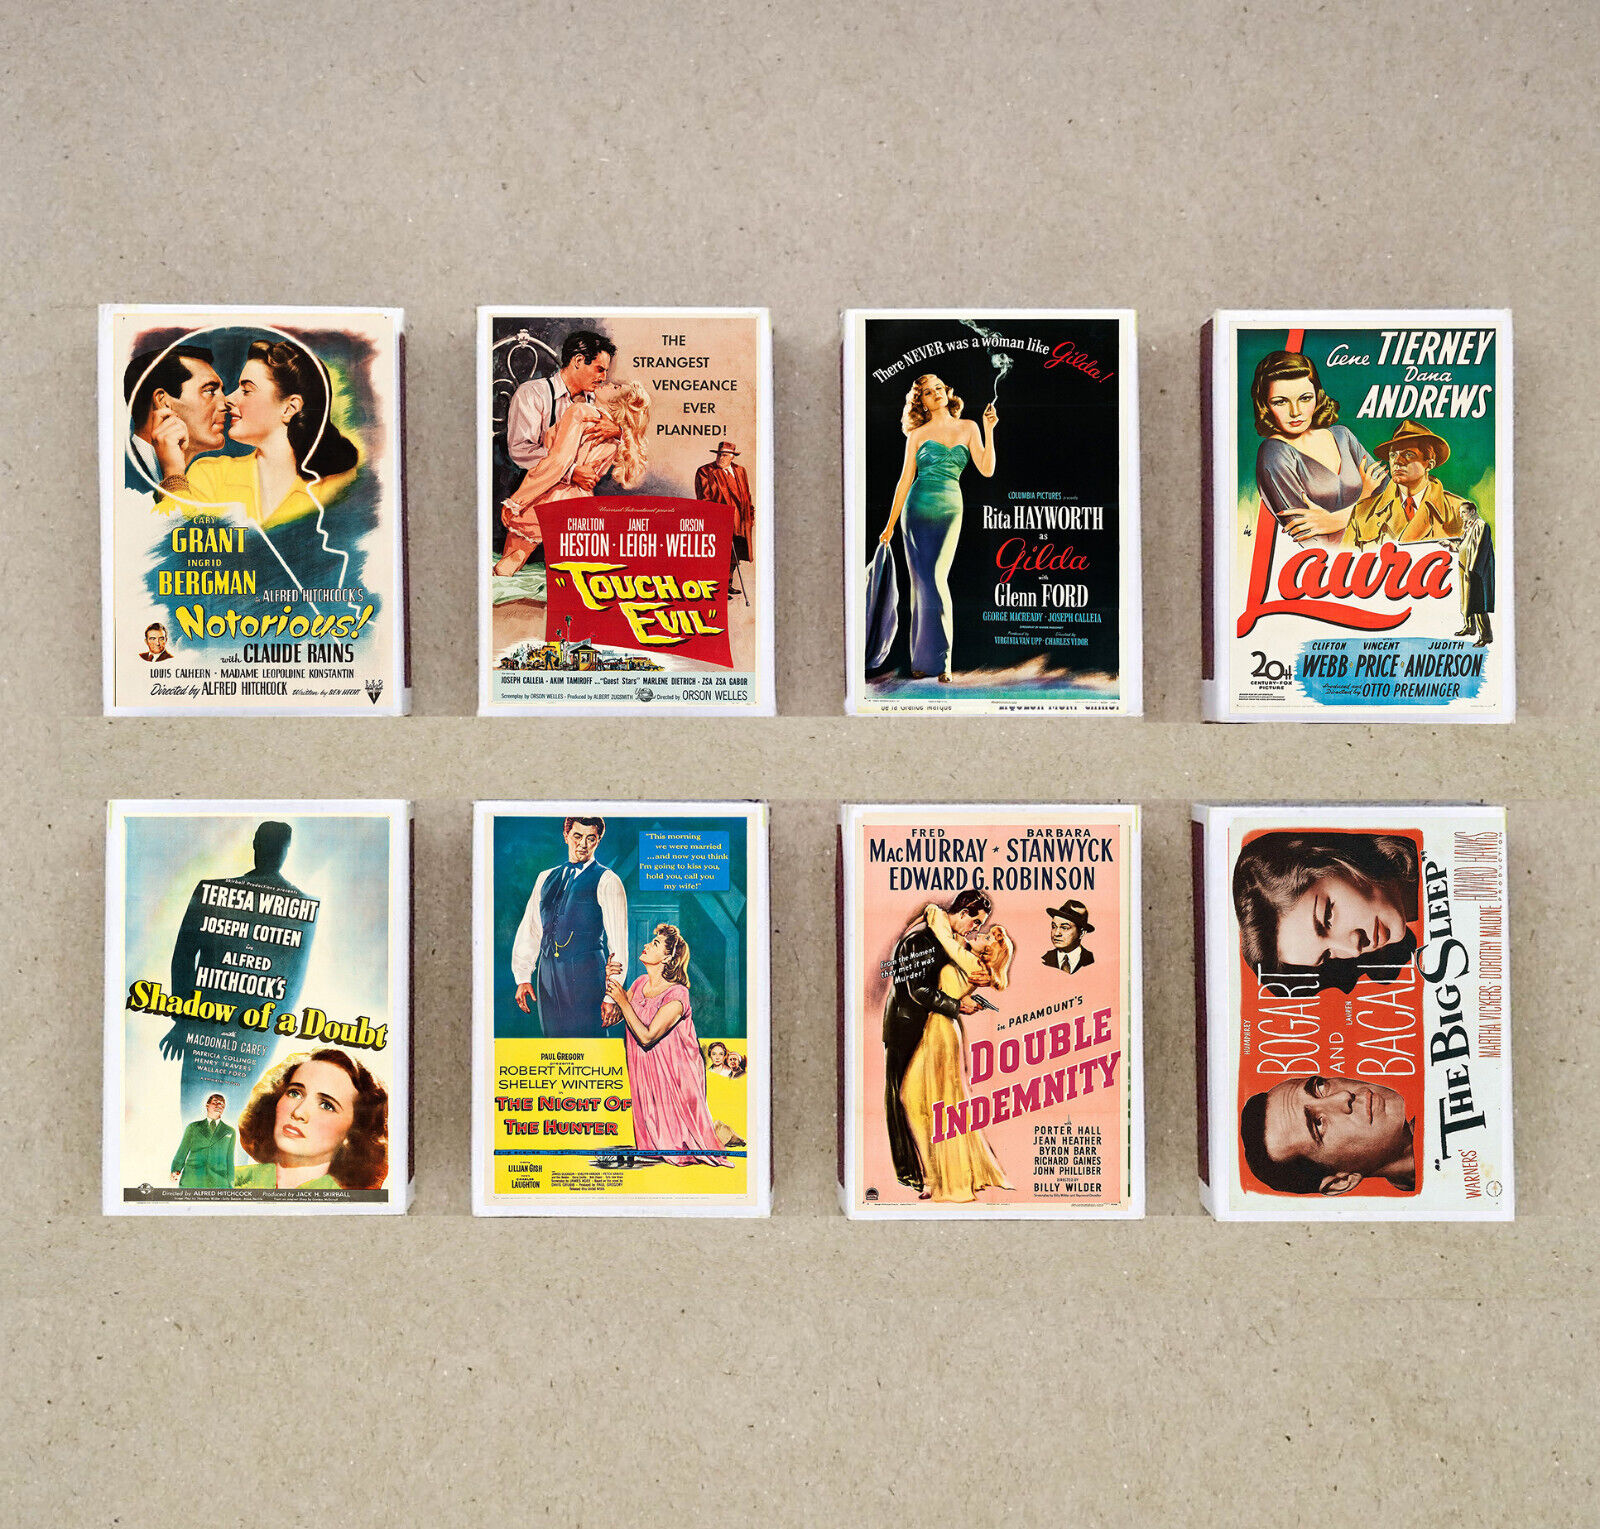 set of 8 matches Classic FILM NOIR movie poster reprint match holder printing